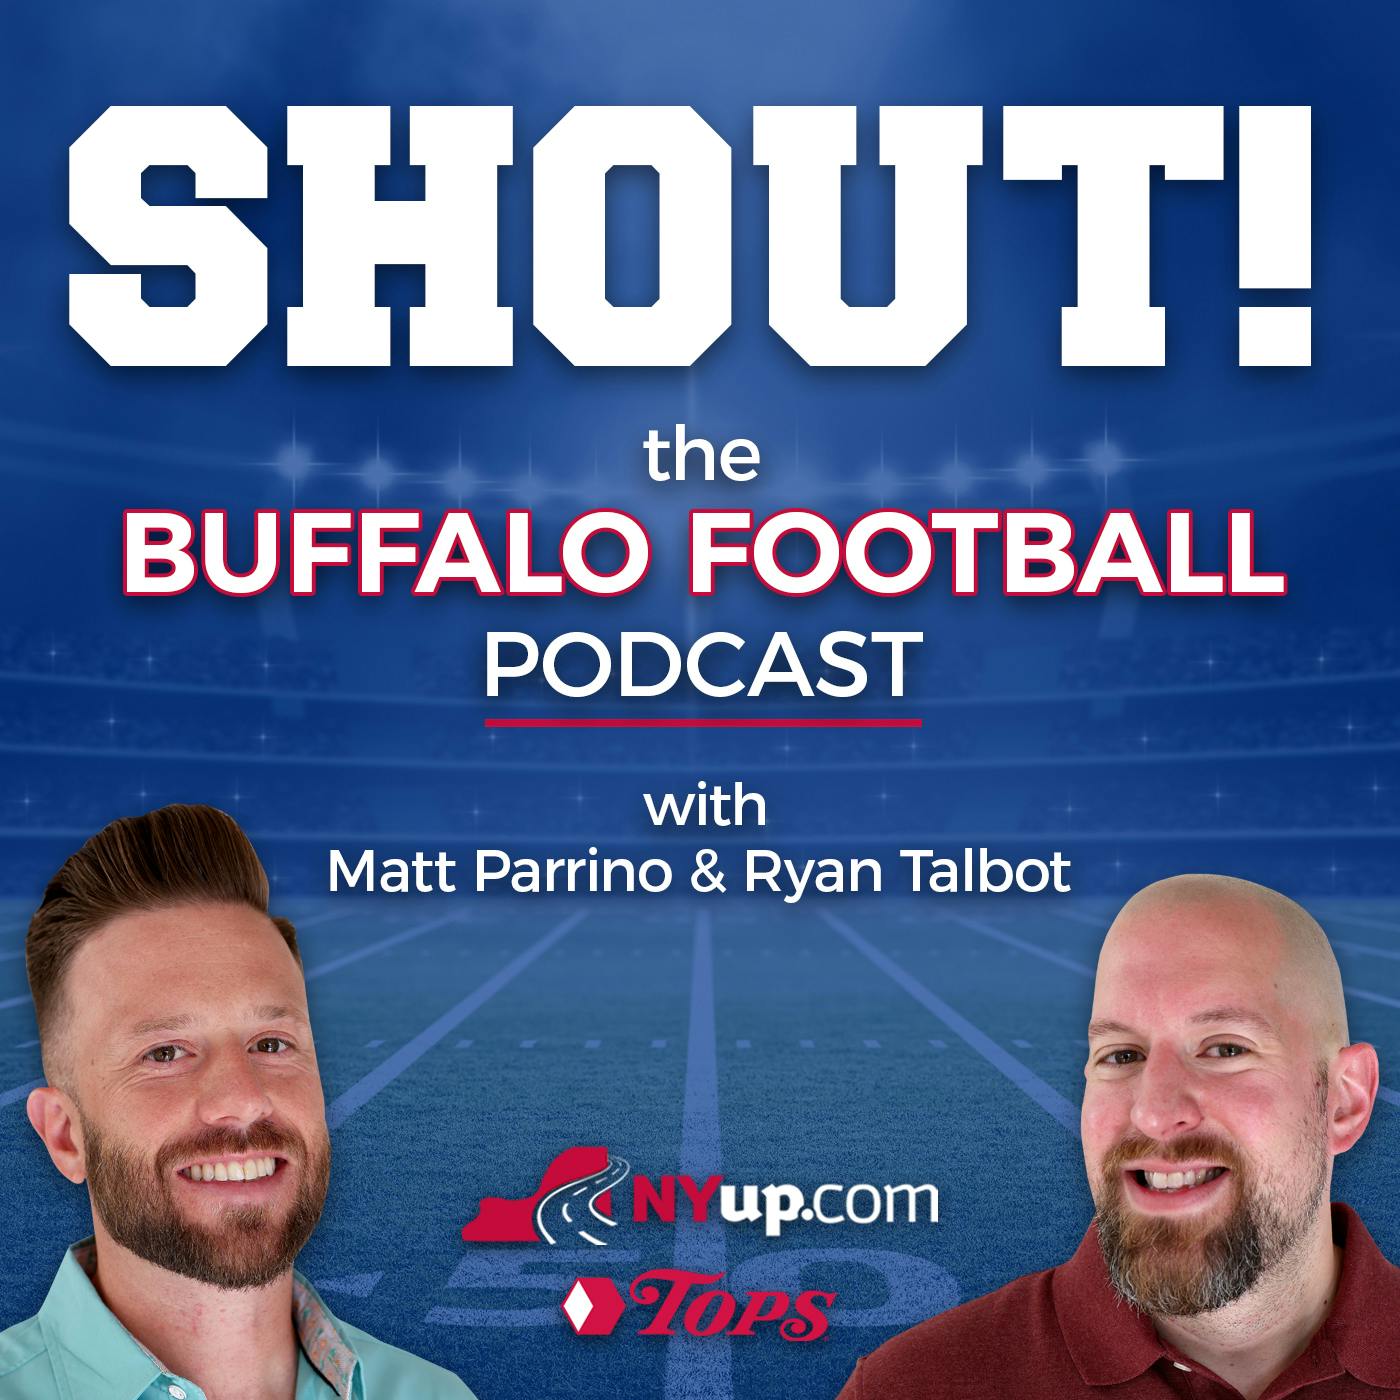 So, the door isn't closed on Micah Hyde, Tre White rejoining Bills: Should it be? Reacting to Beane & McDermott owners meeting comments